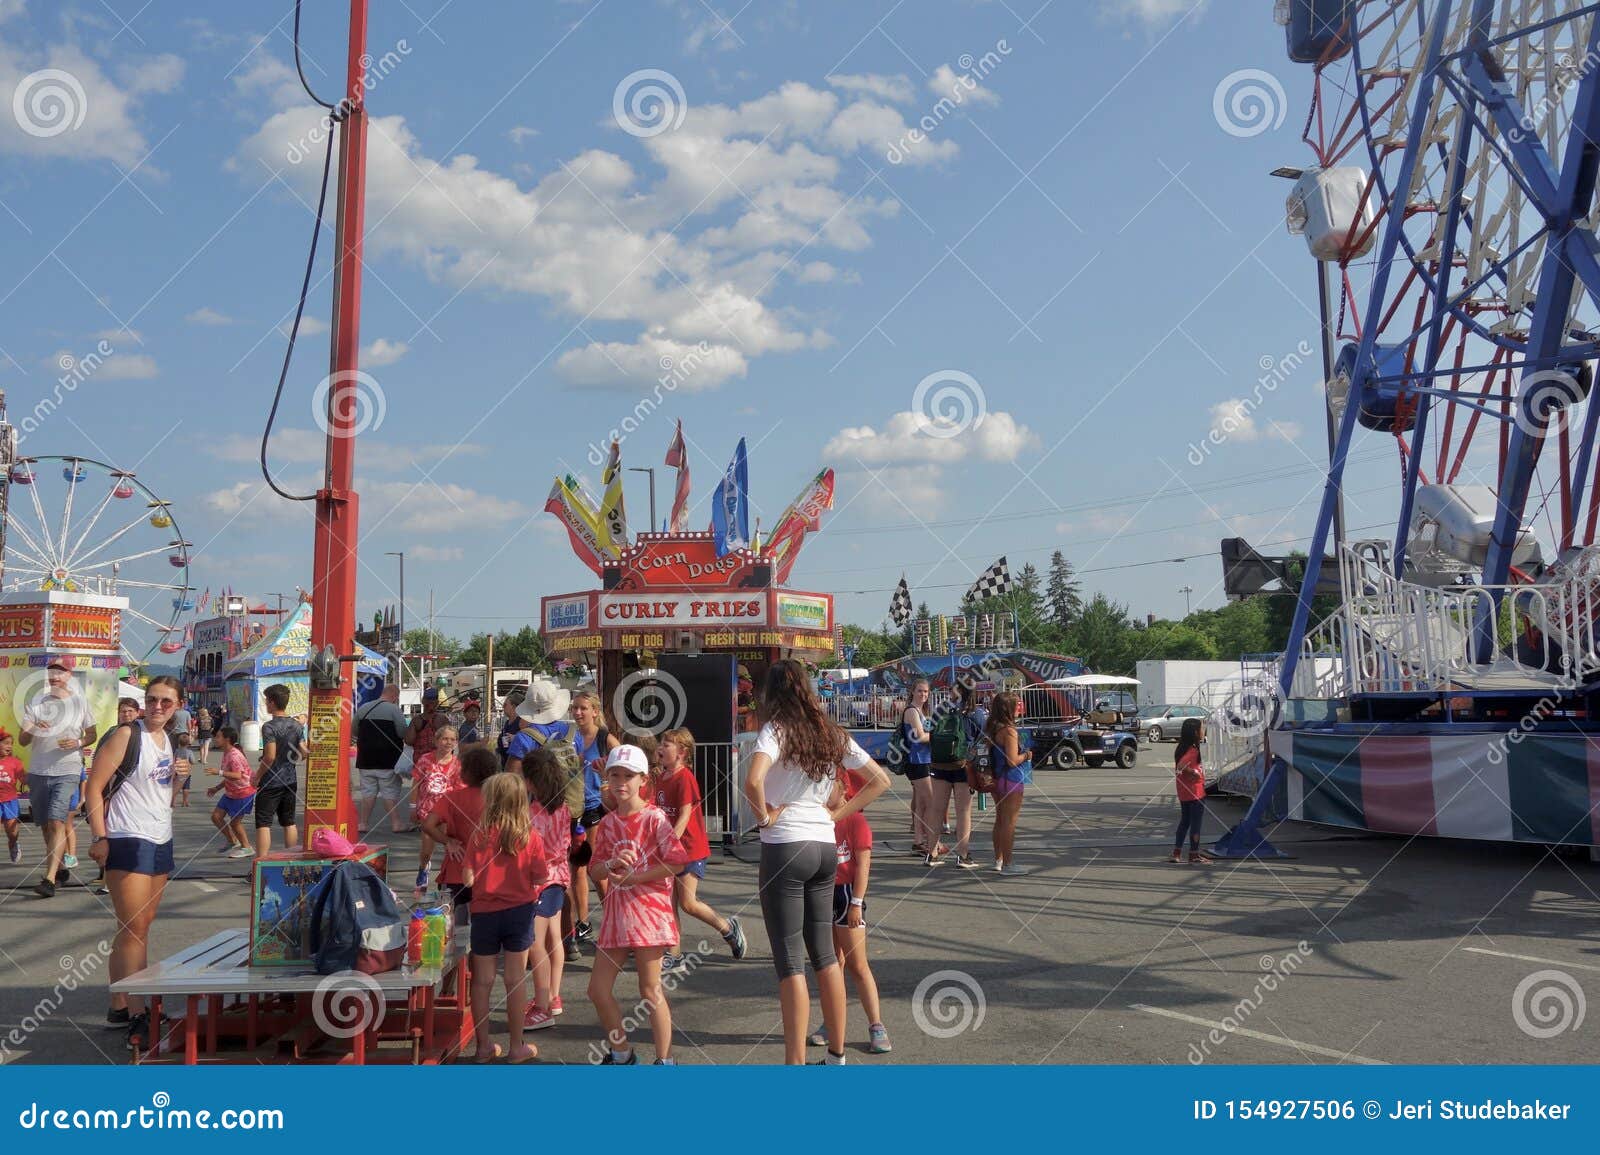 Hot girls at the county fair 1 048 Kids Fair Rides Photos Free Royalty Free Stock Photos From Dreamstime